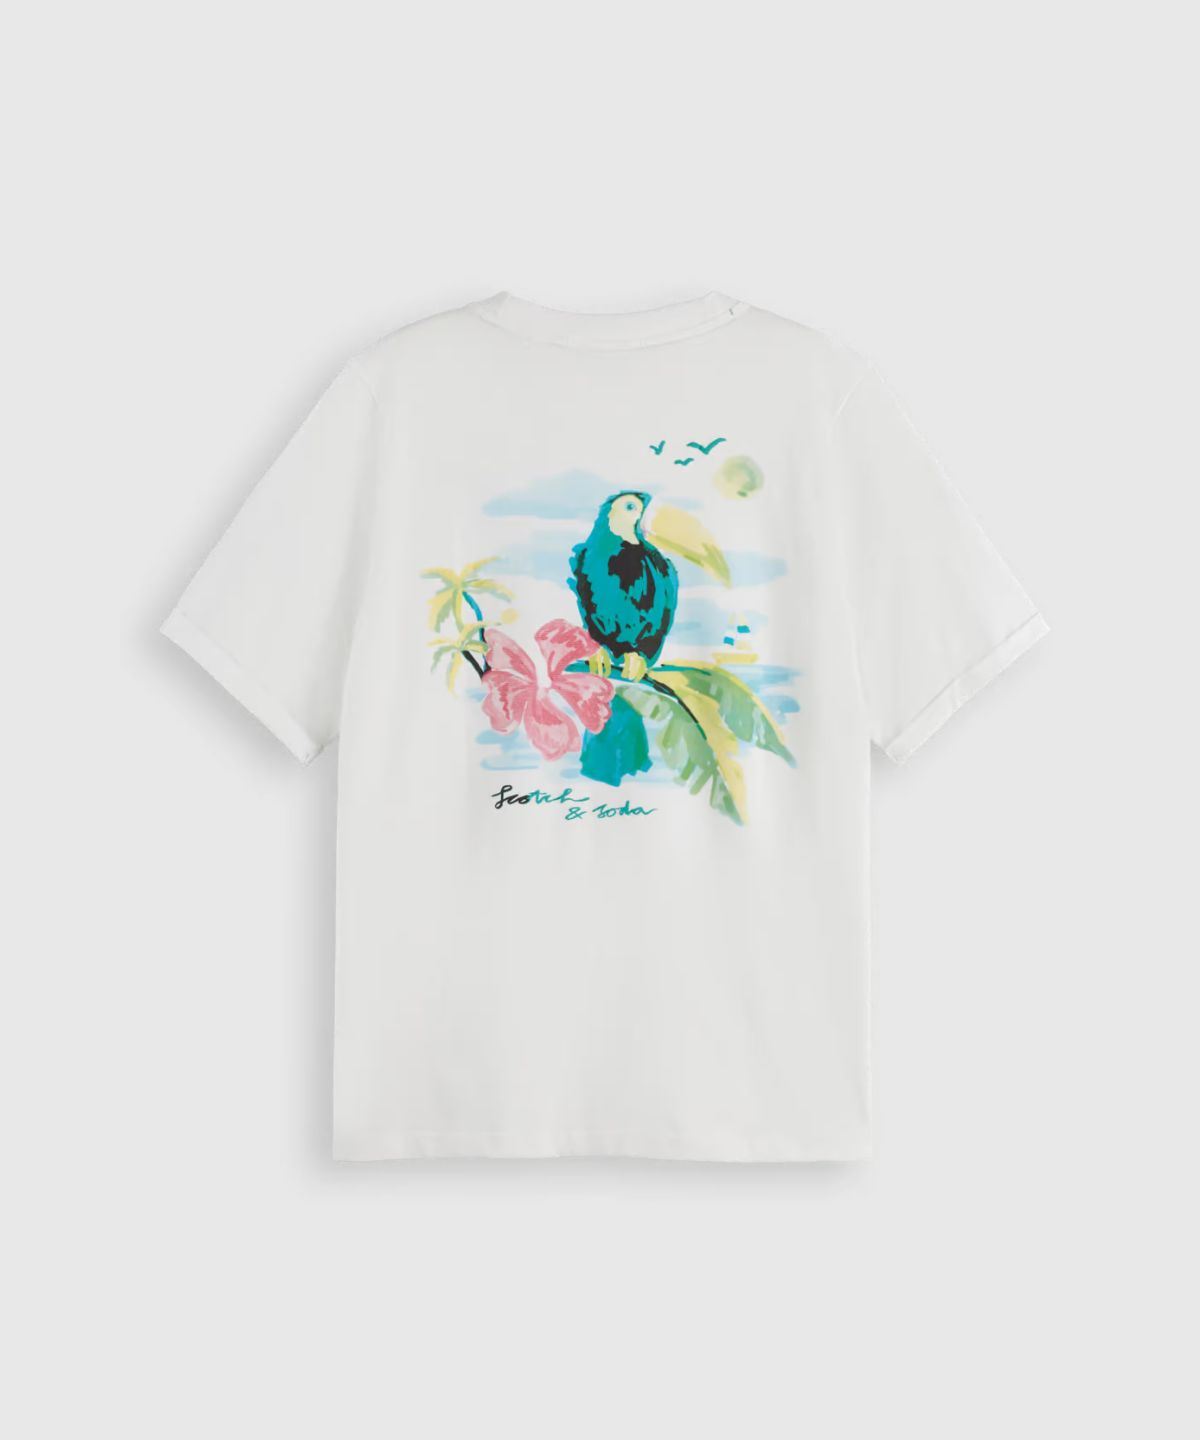 Relaxed fit graphic t-shirt